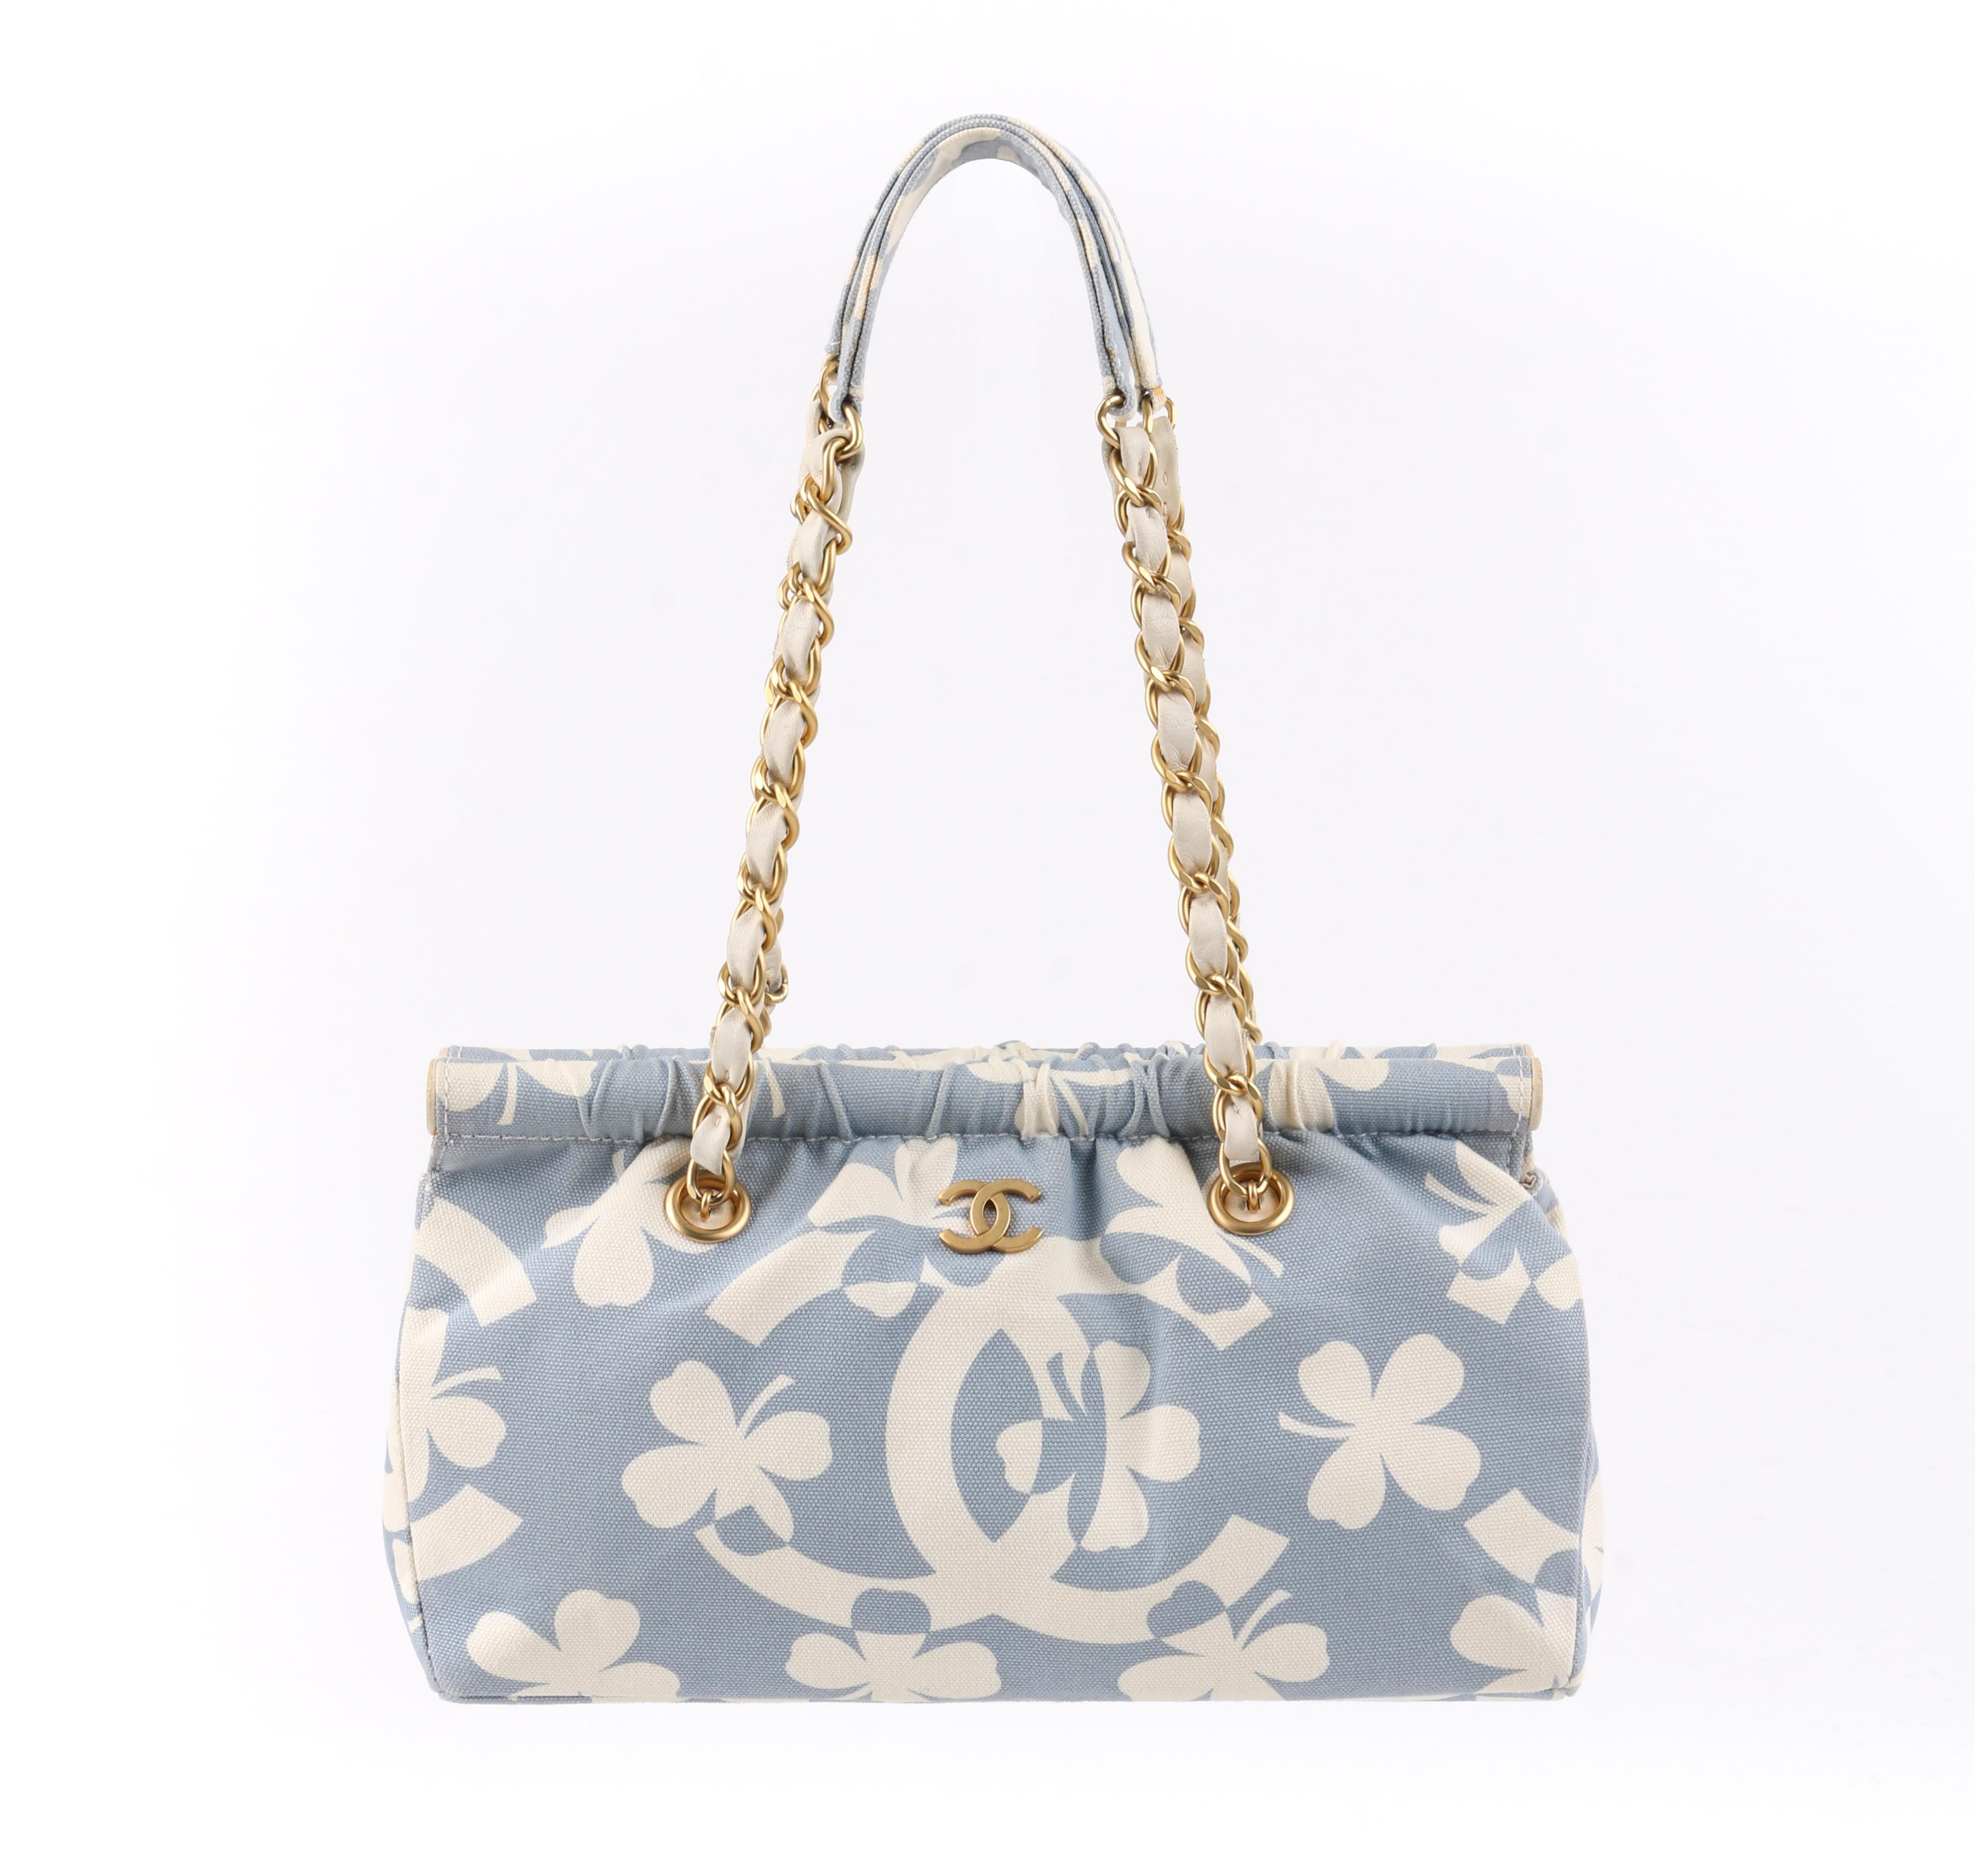 DESCRIPTION: CHANEL S/S 2004 Powder Blue Four Leaf Clover Canvas Chain Handle Purse w/ Wallet
 
Brand / Manufacturer: Chanel
Collection: Spring / Summer 2004
Designer: Karl Lagerfeld
Manufacturer Style Name: 
Style: Chain handle purse with